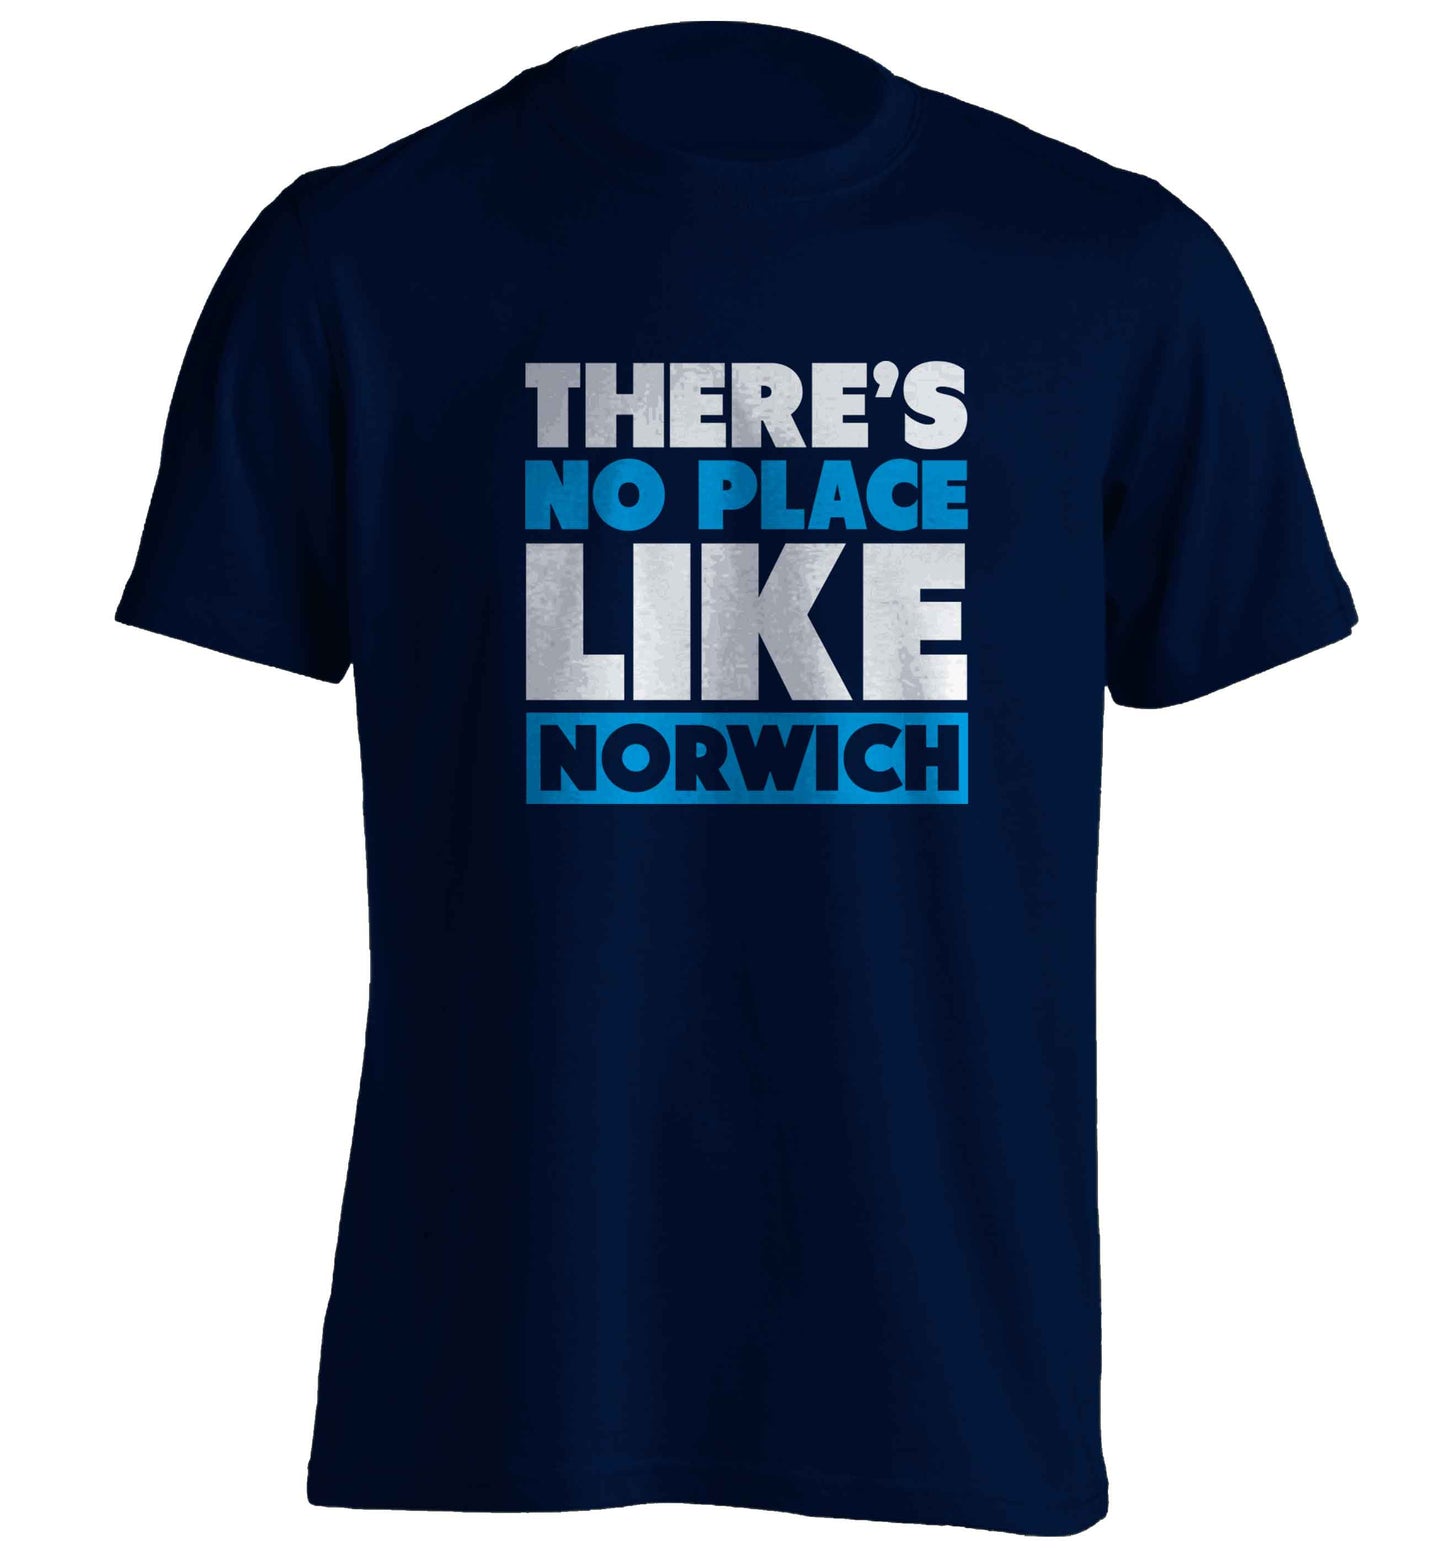 There's no place like Norwich adults unisex navy Tshirt 2XL